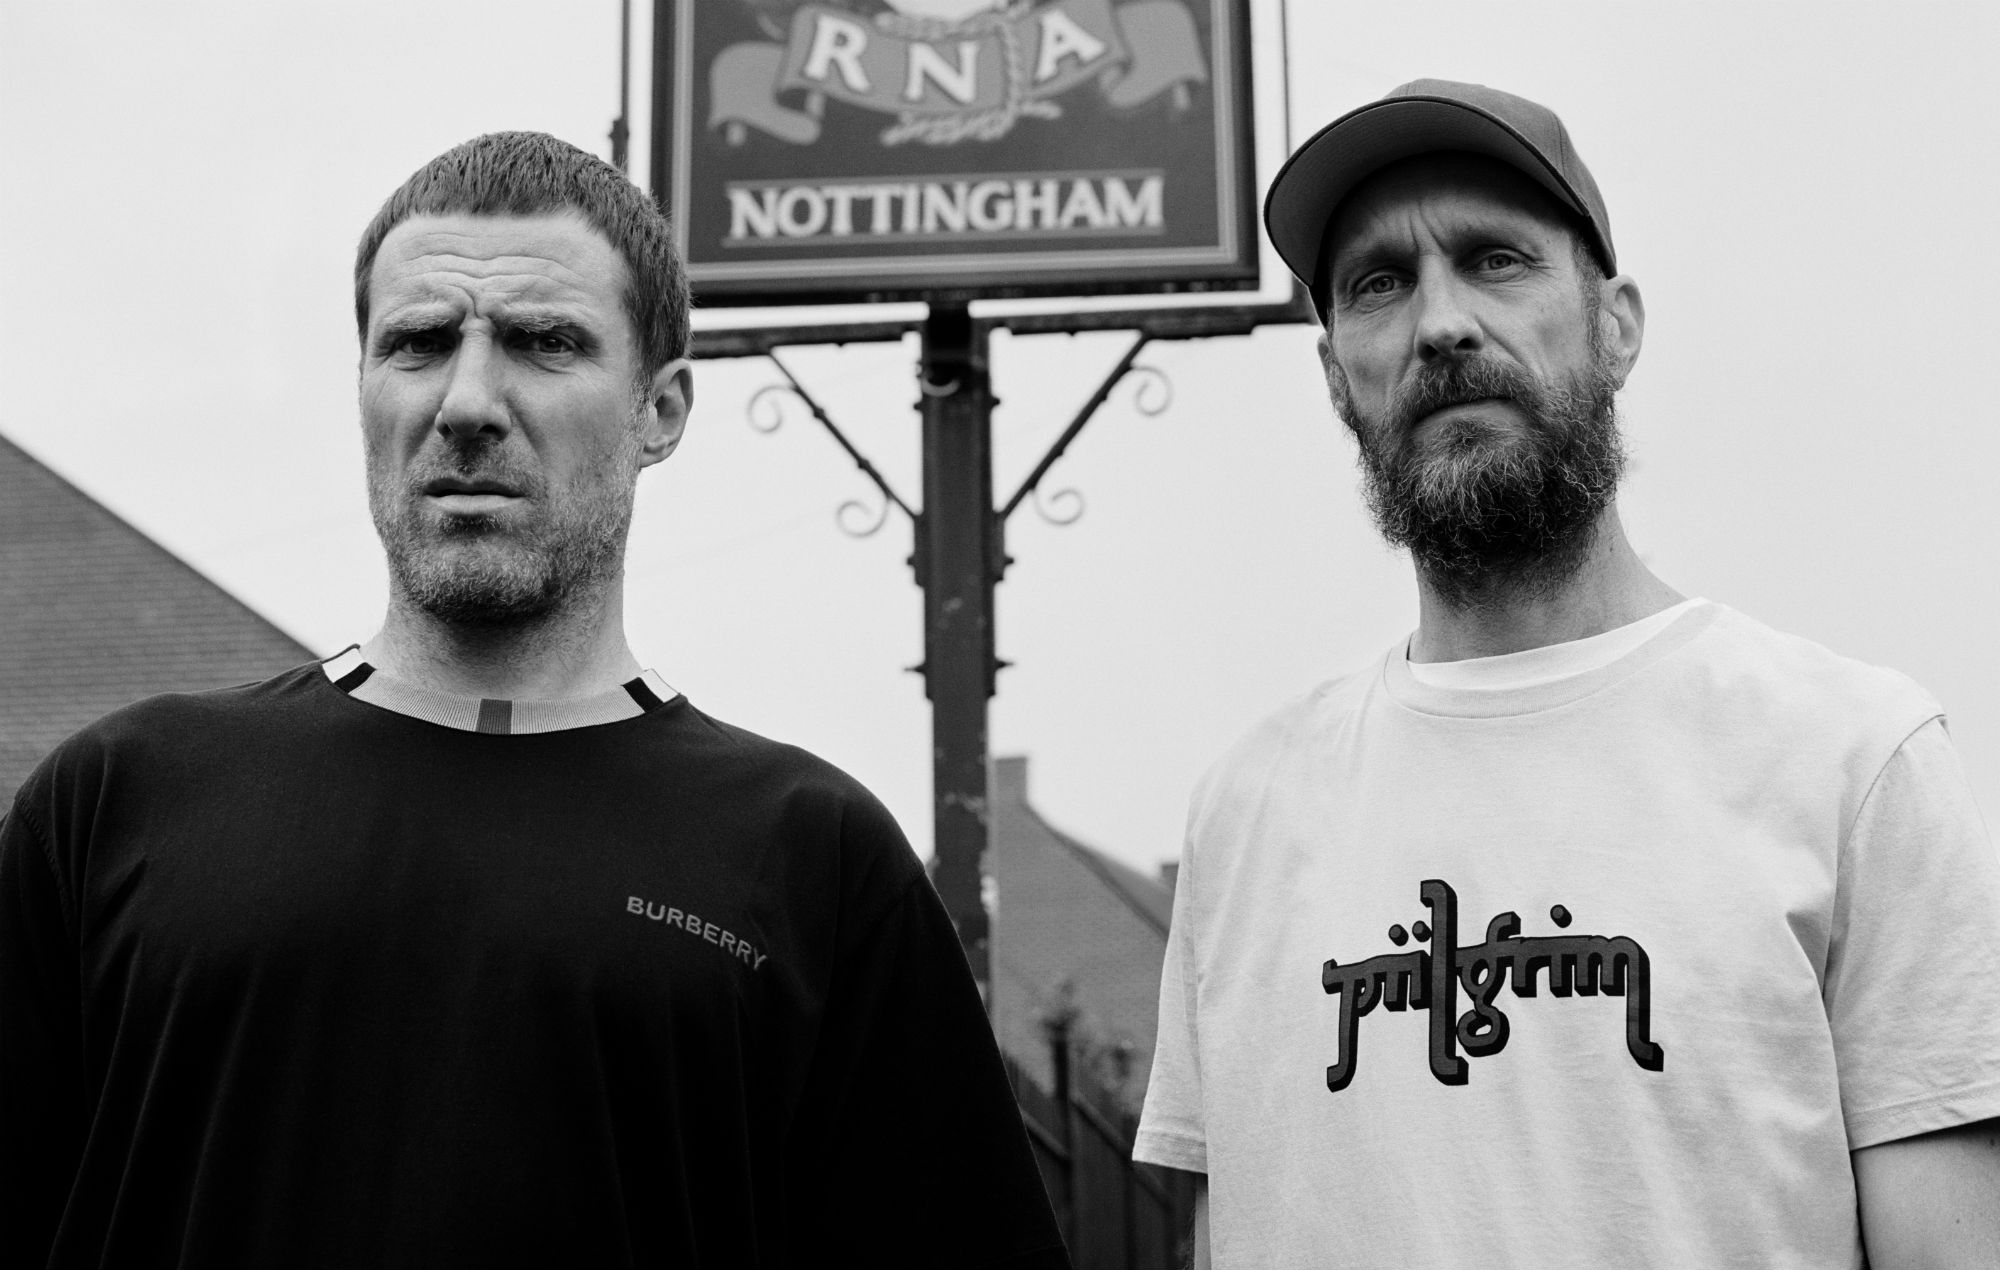 Sleaford Mods: “We live in such a cynical time. You start to question yourself”